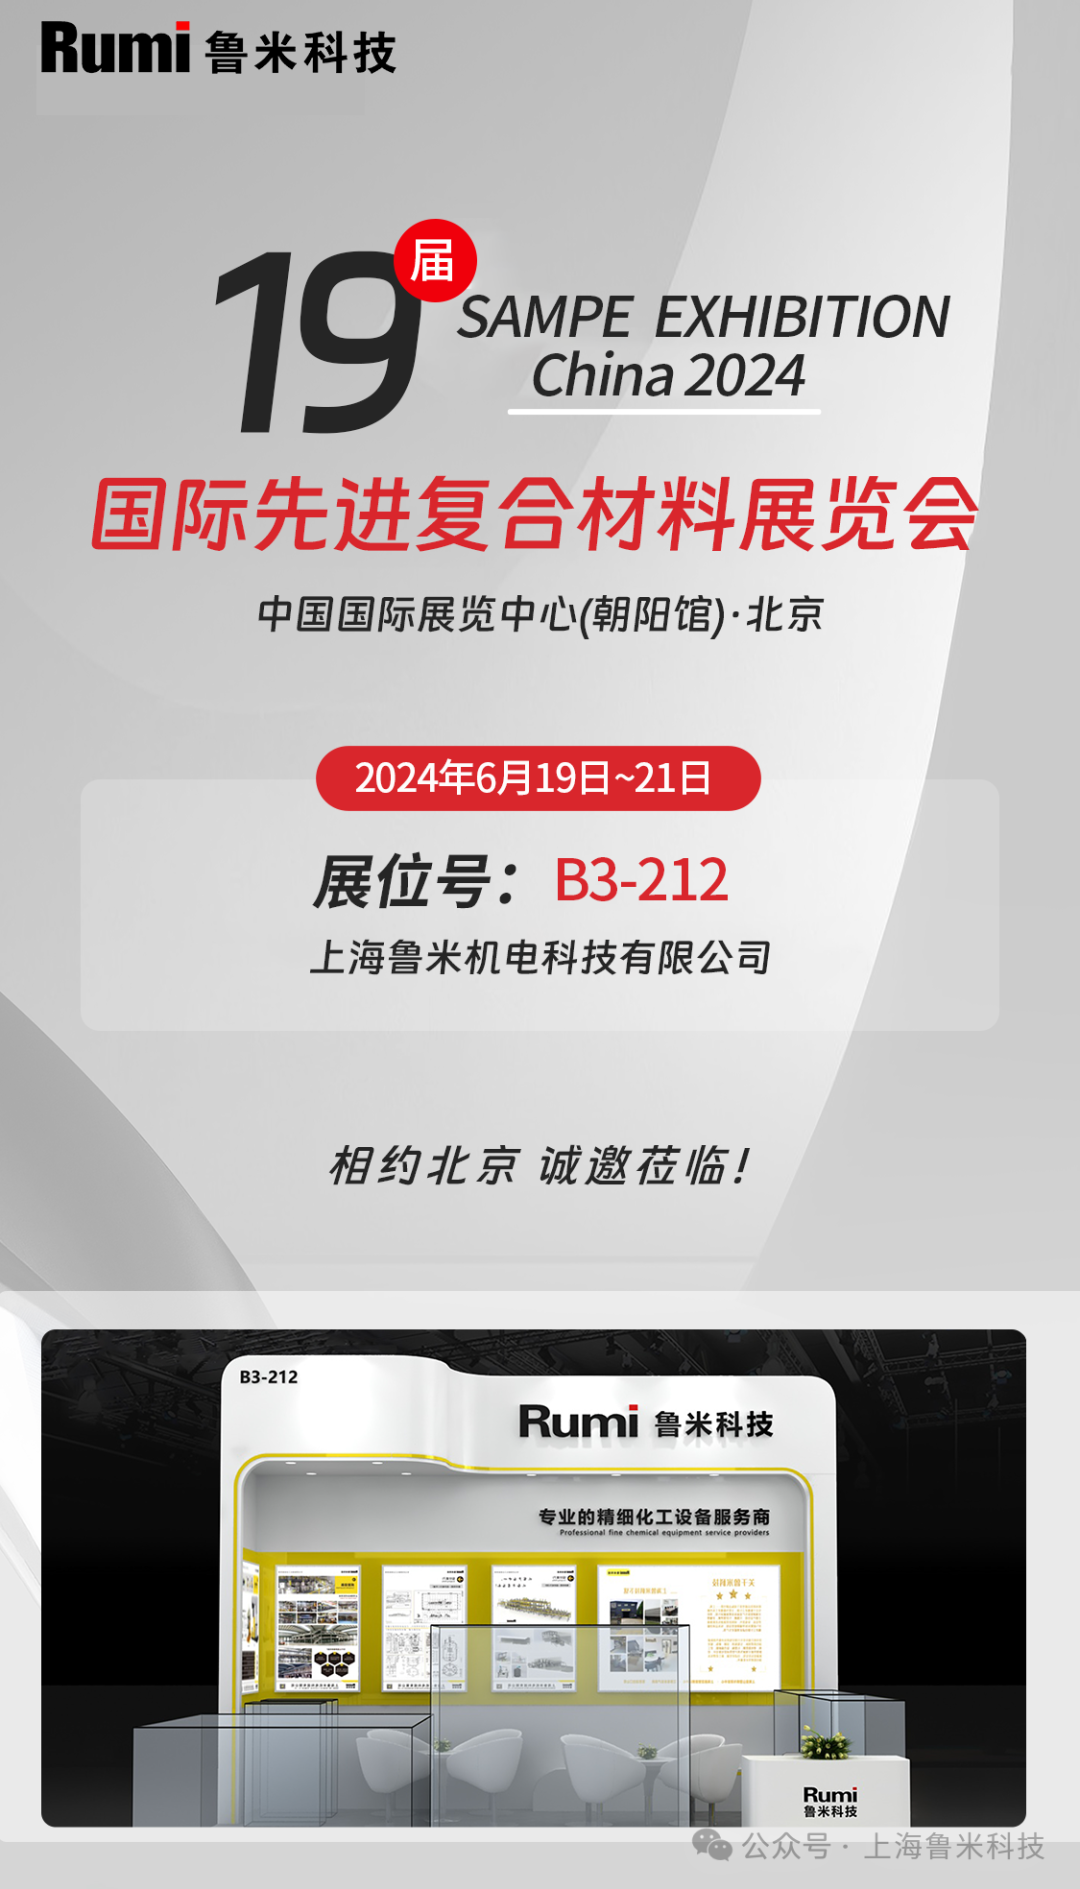 RUMI Technology will attend the 19th SAMPE EXHIBITION CHINA 2024